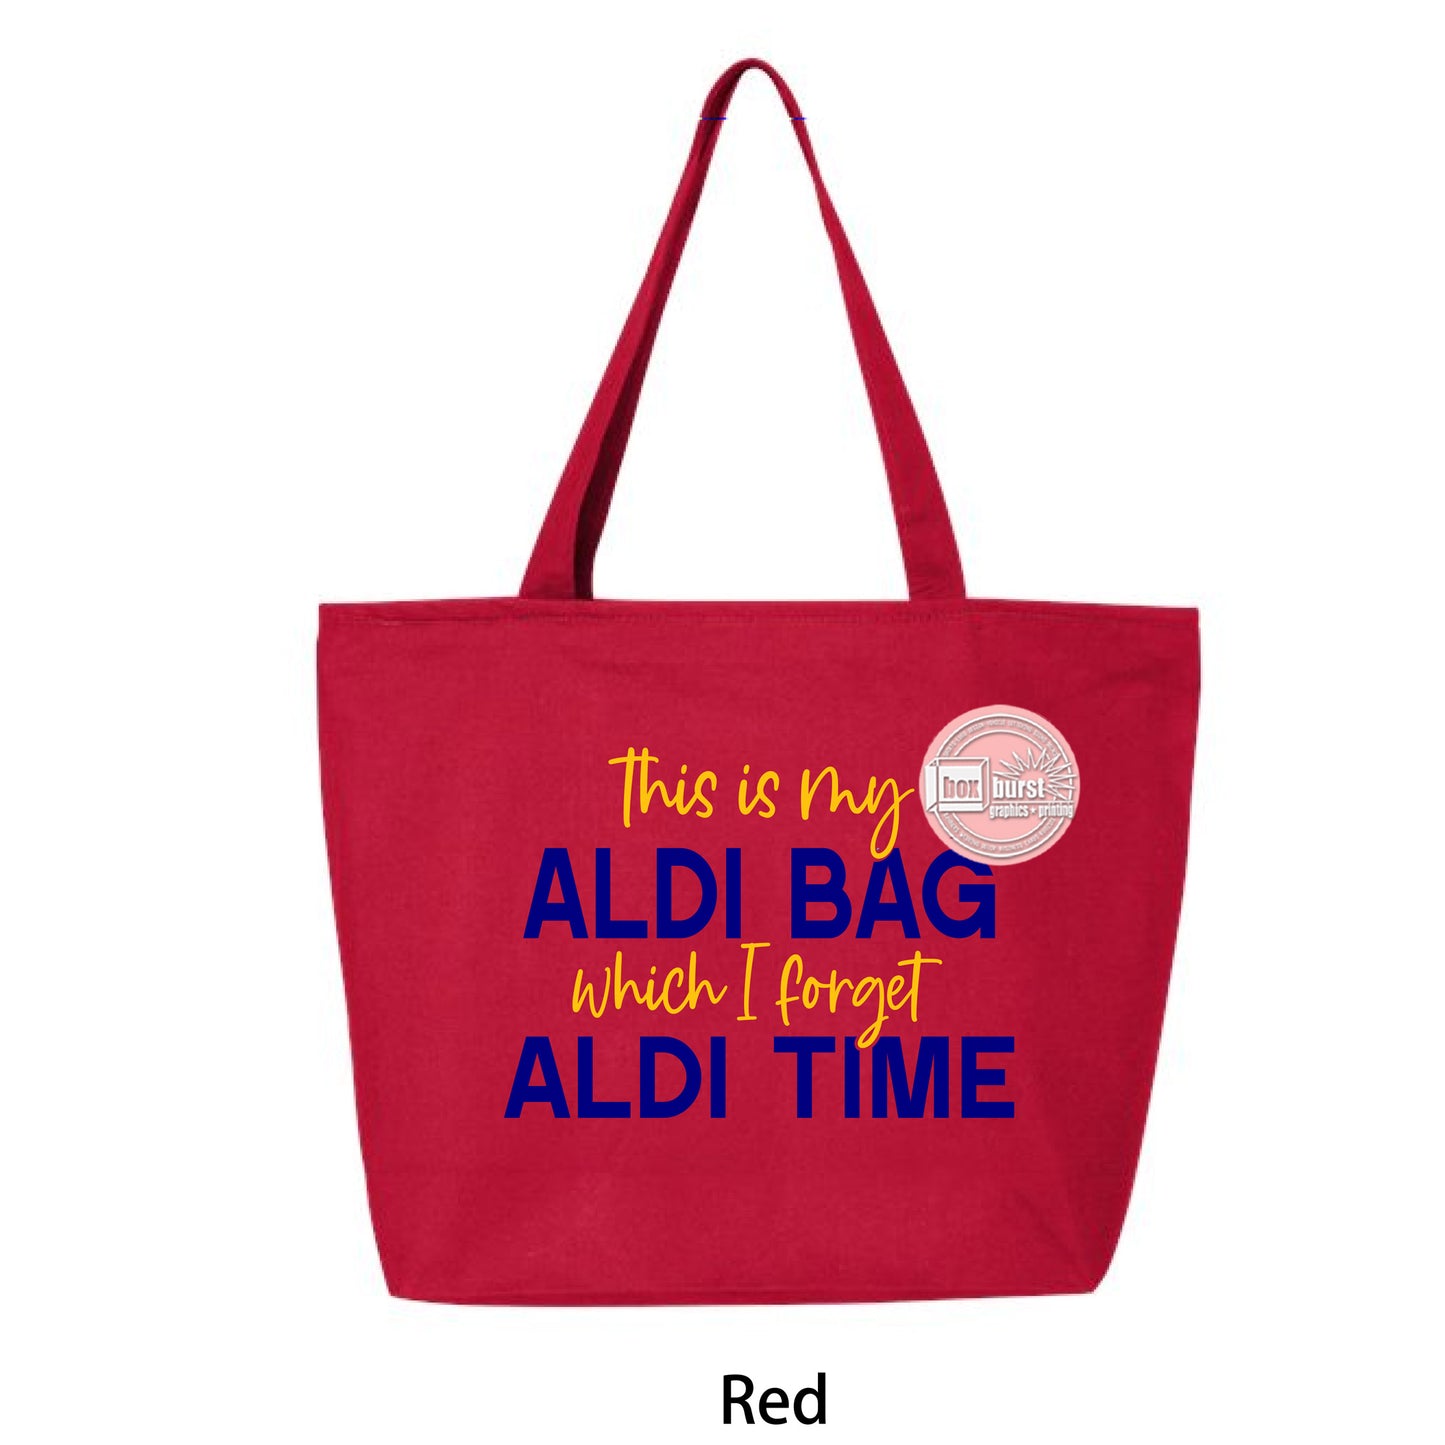 Forgetful Shopper's Delight My Aldi's Grocery Bag Tote w/ a zippered pocket inside